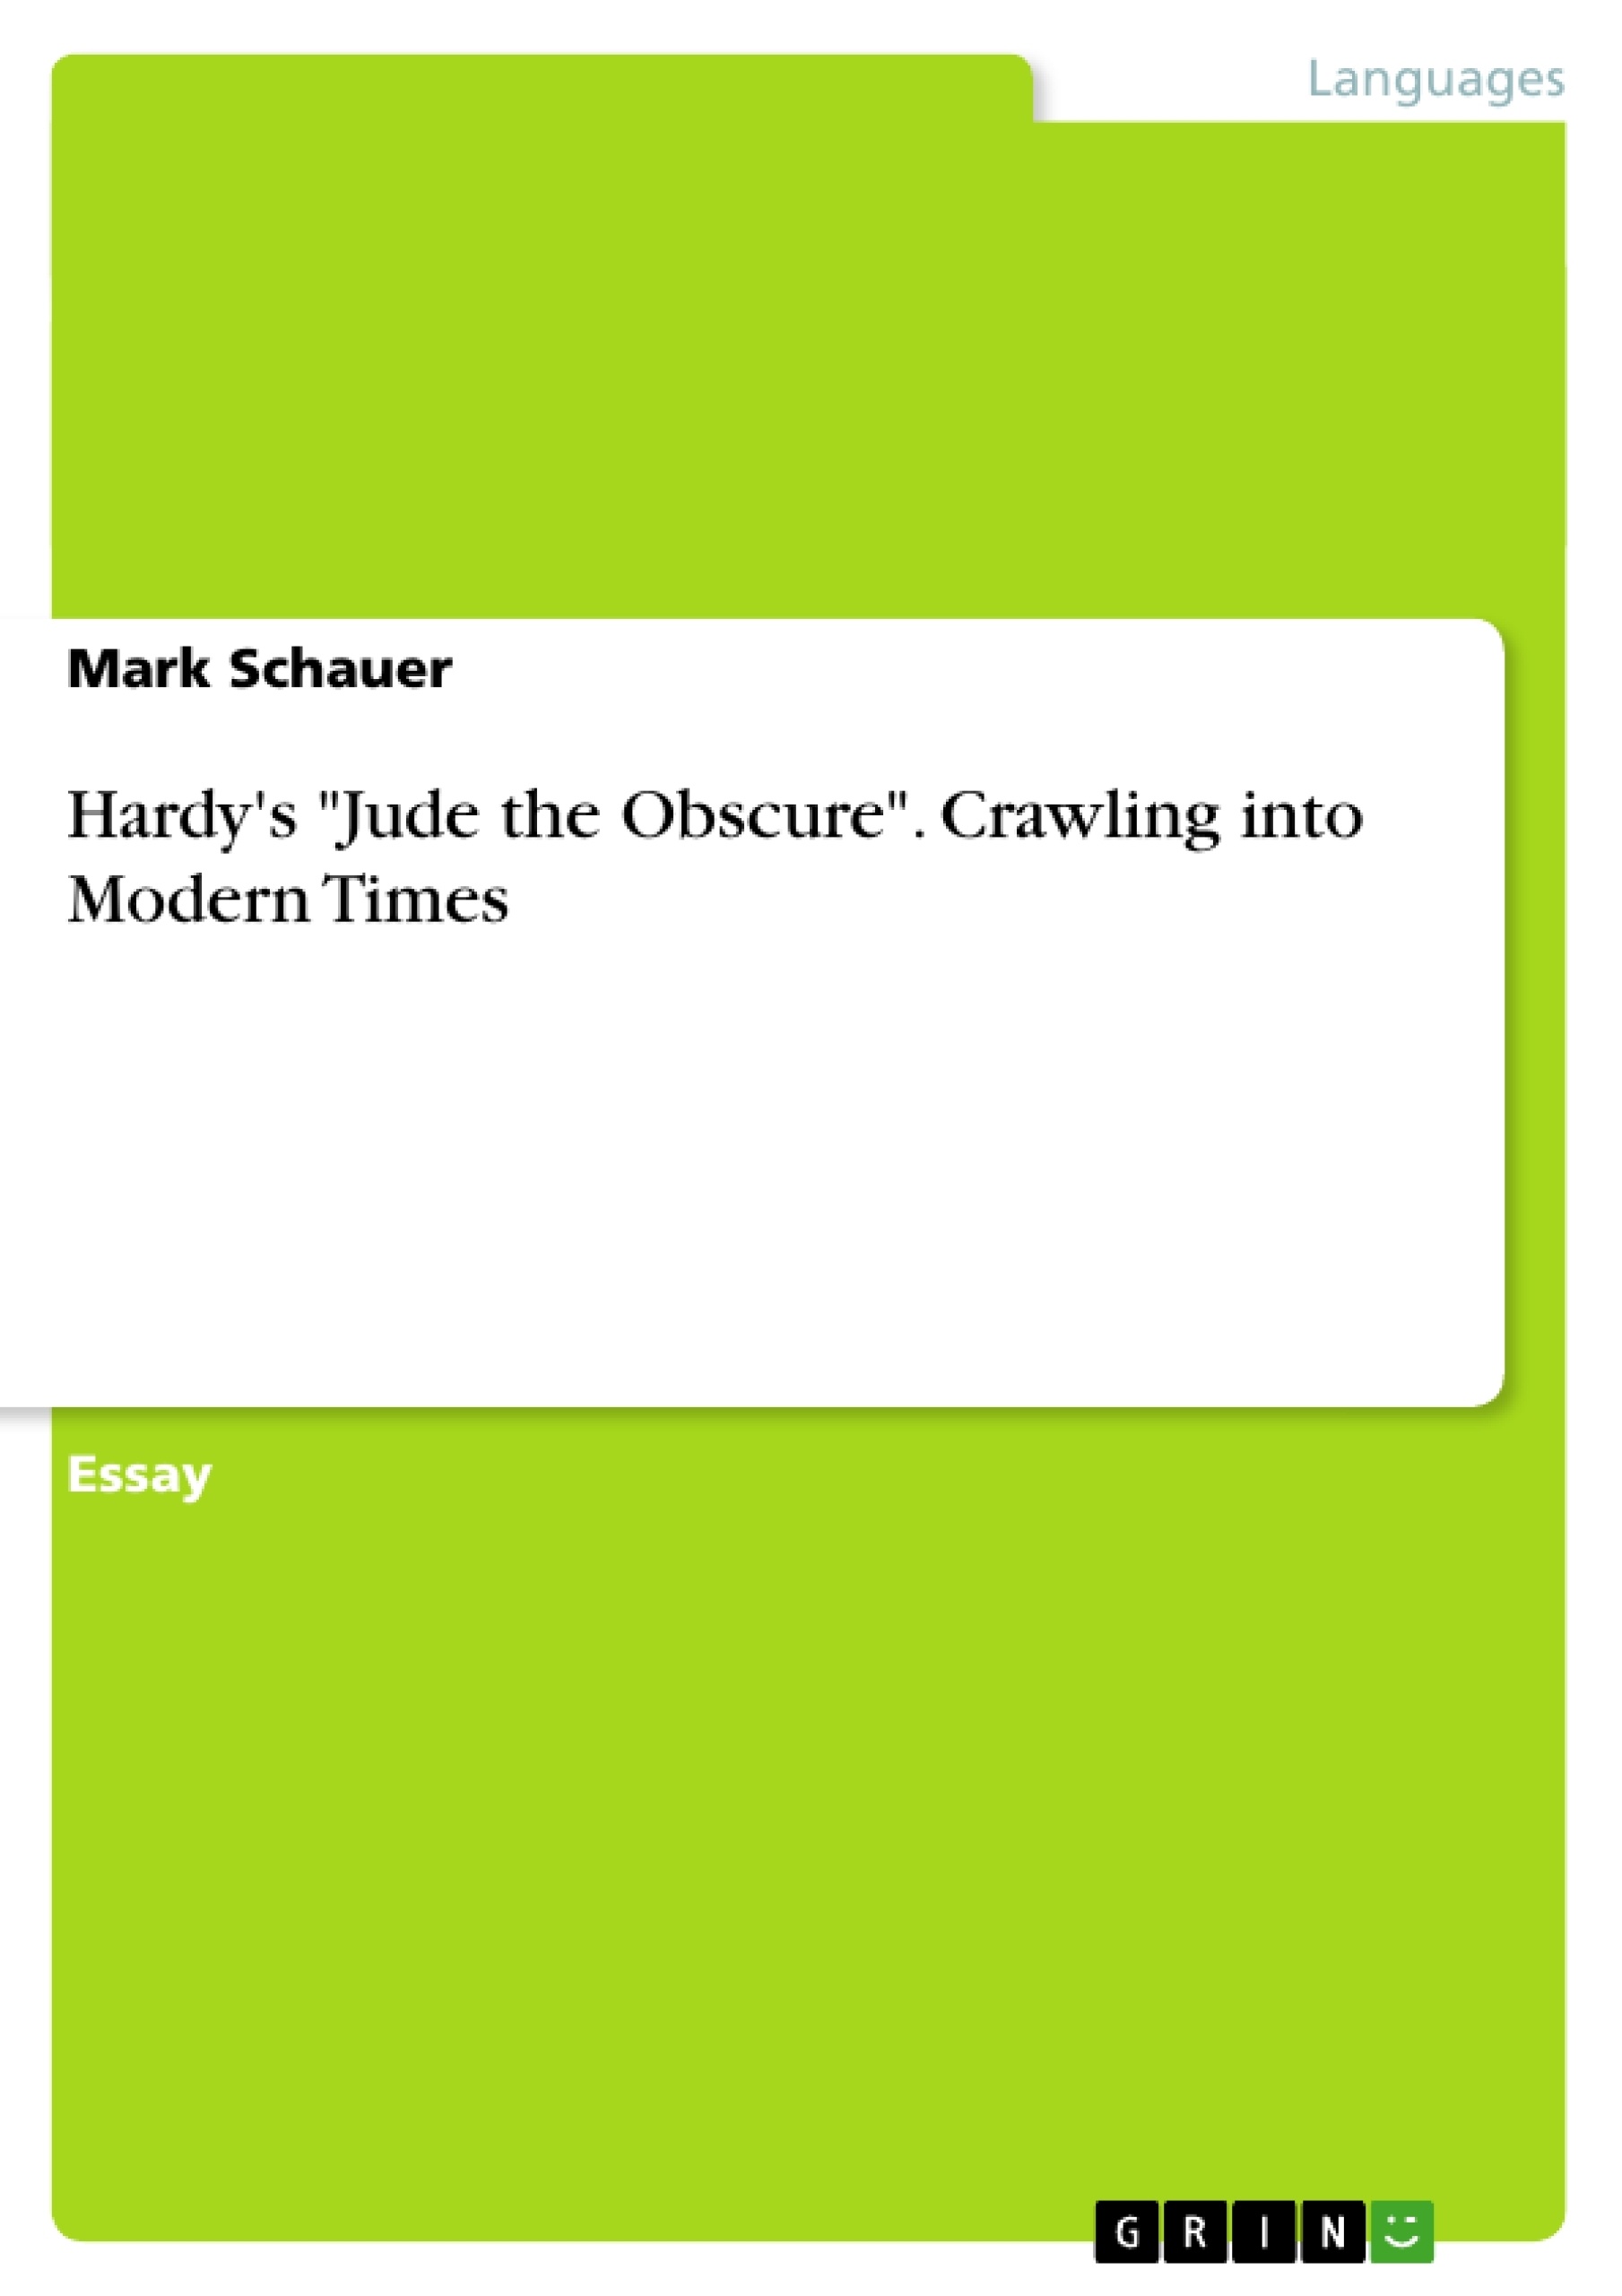 Titel: Hardy's "Jude the Obscure". Crawling into Modern Times